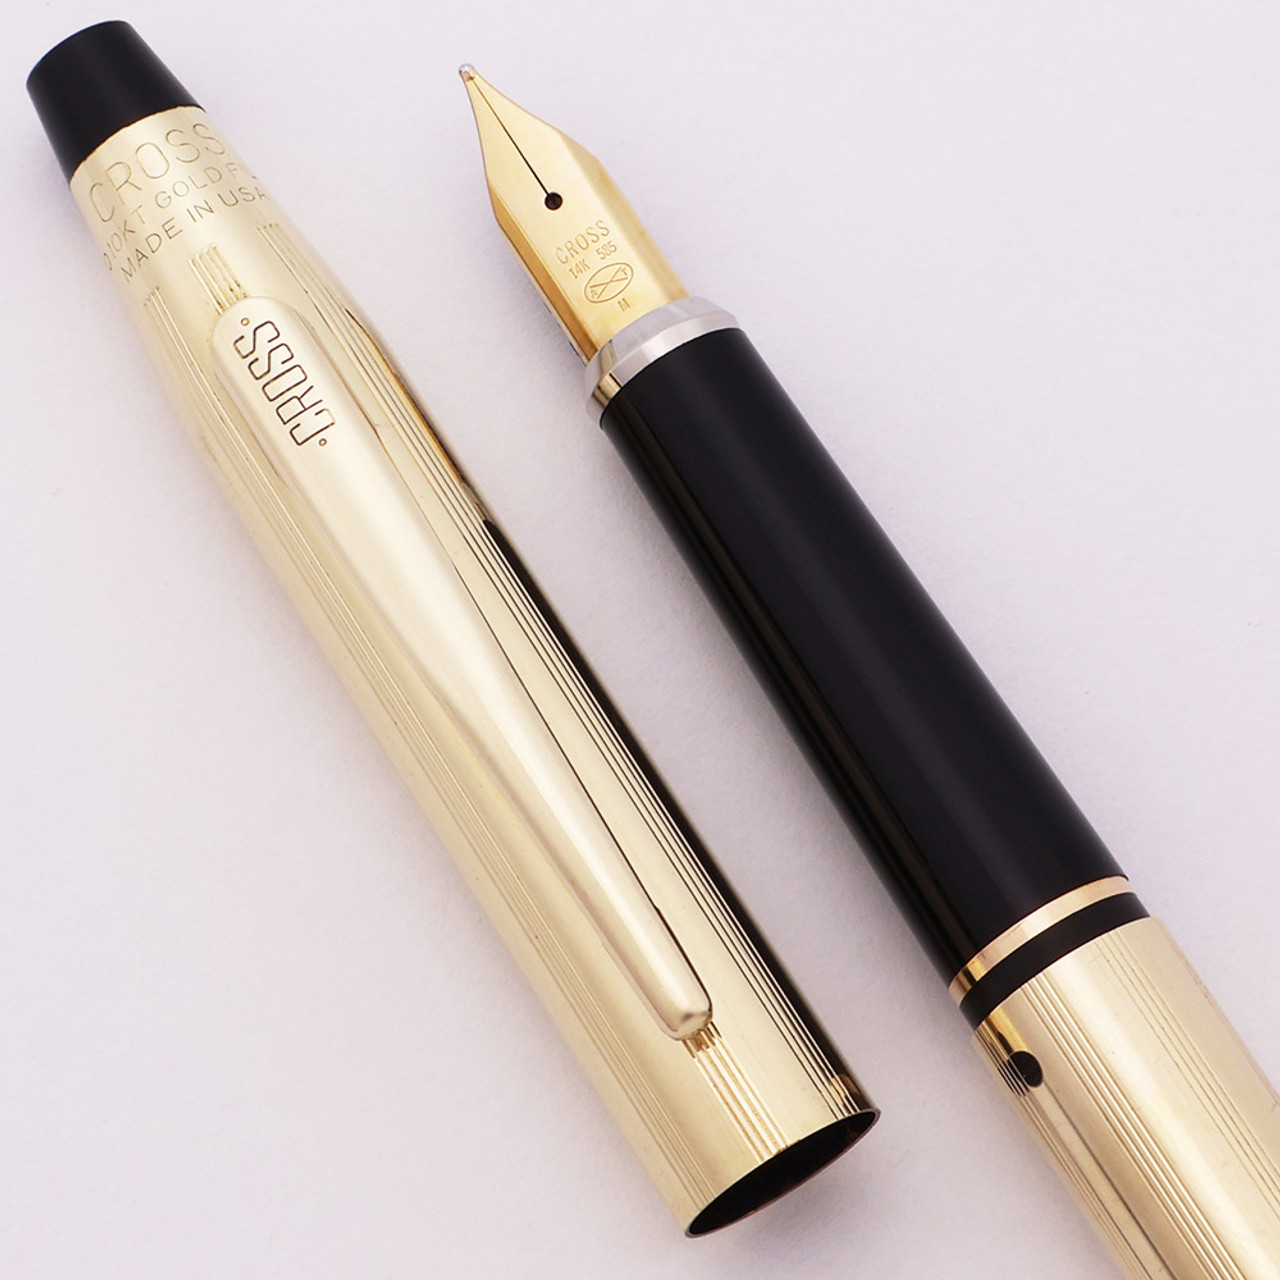 Cross Century (Classic) Fountain Pen (1980s) - Gold Filled Lined,  C/C, 14k Medium Nib (Excellent +, Works Well)